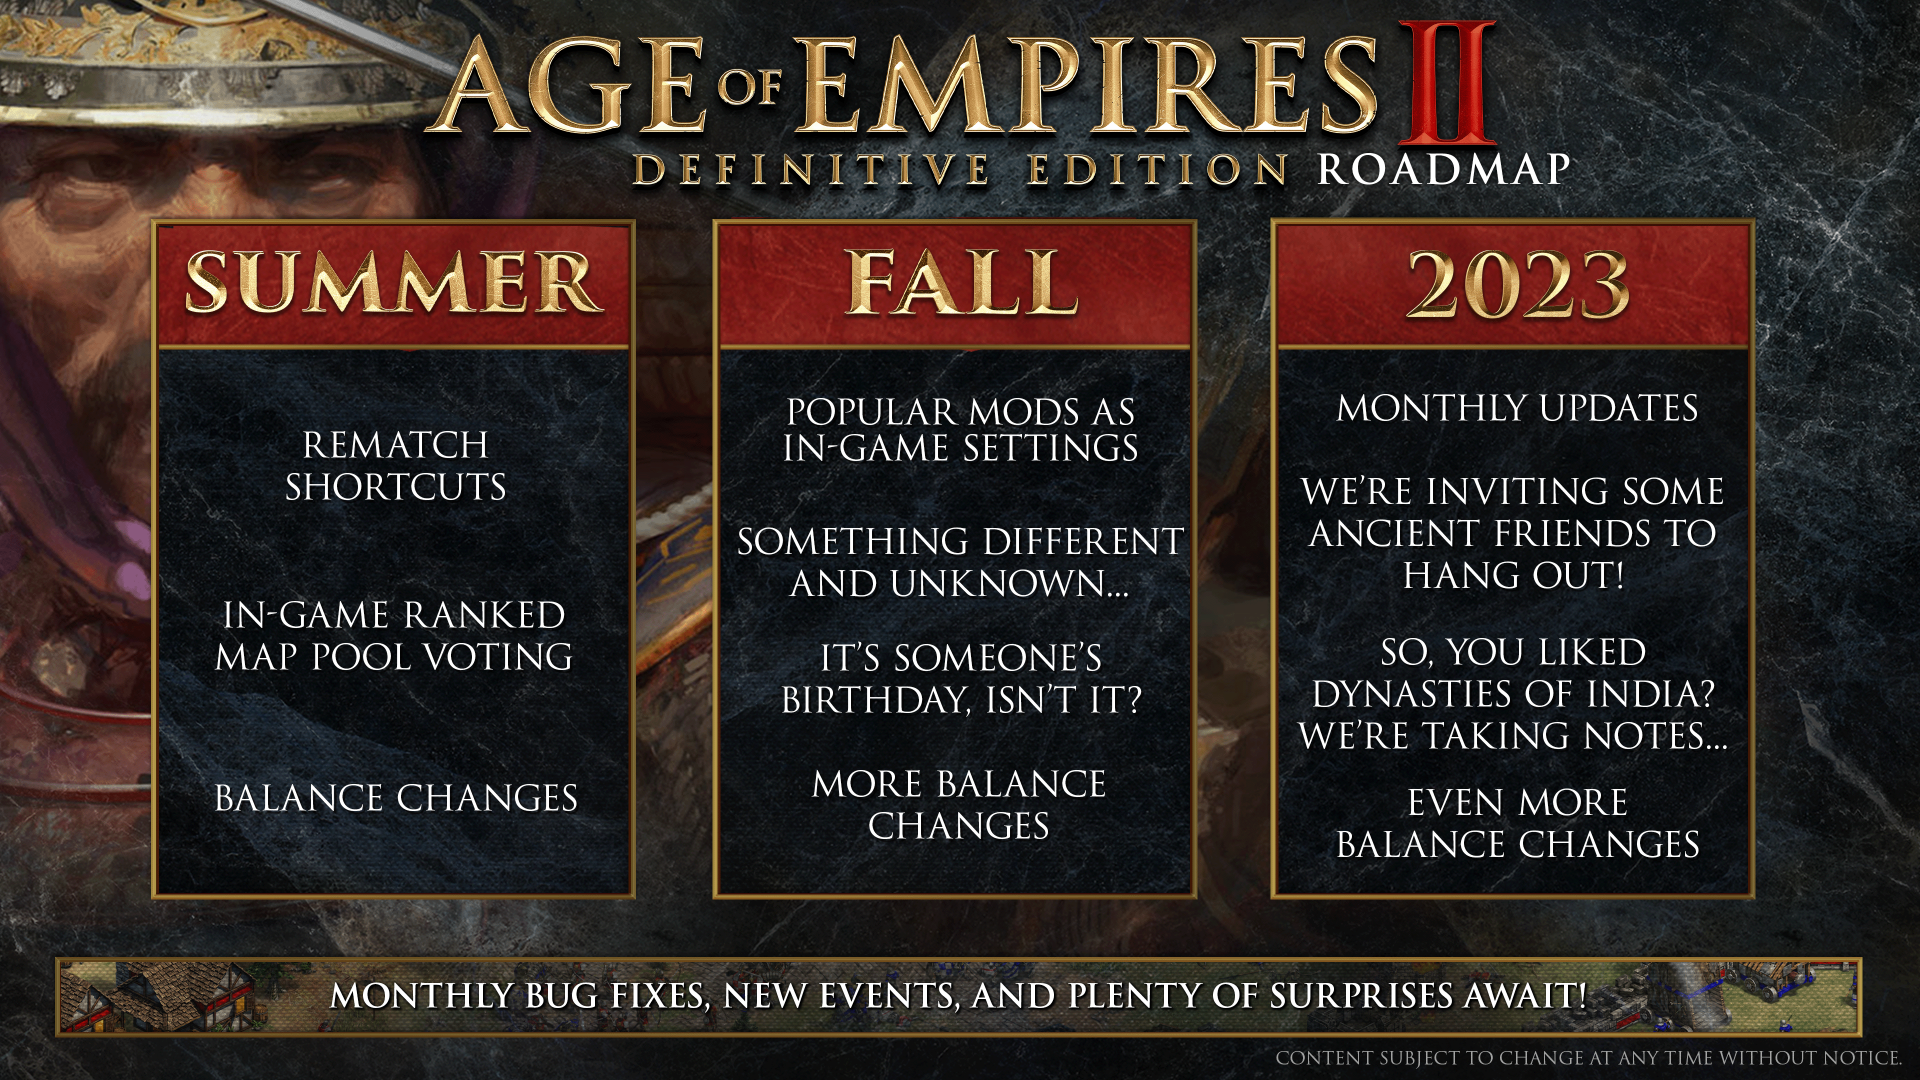 Age of Empires II: Definitive Edition roadmap.